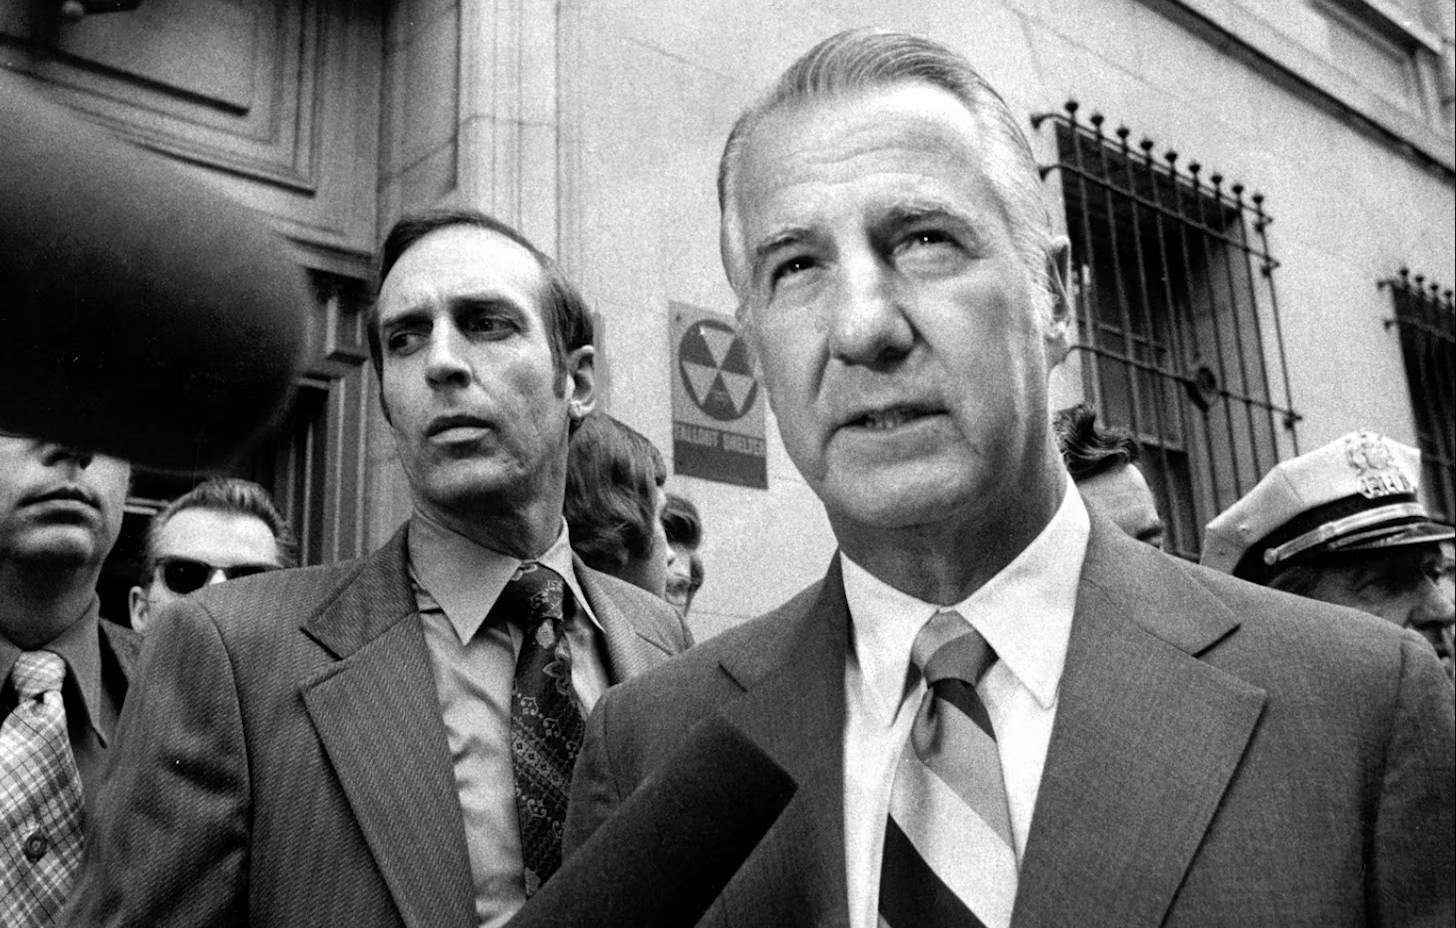 Spiro Agnew's Ghost: A Haunting Political Legacy